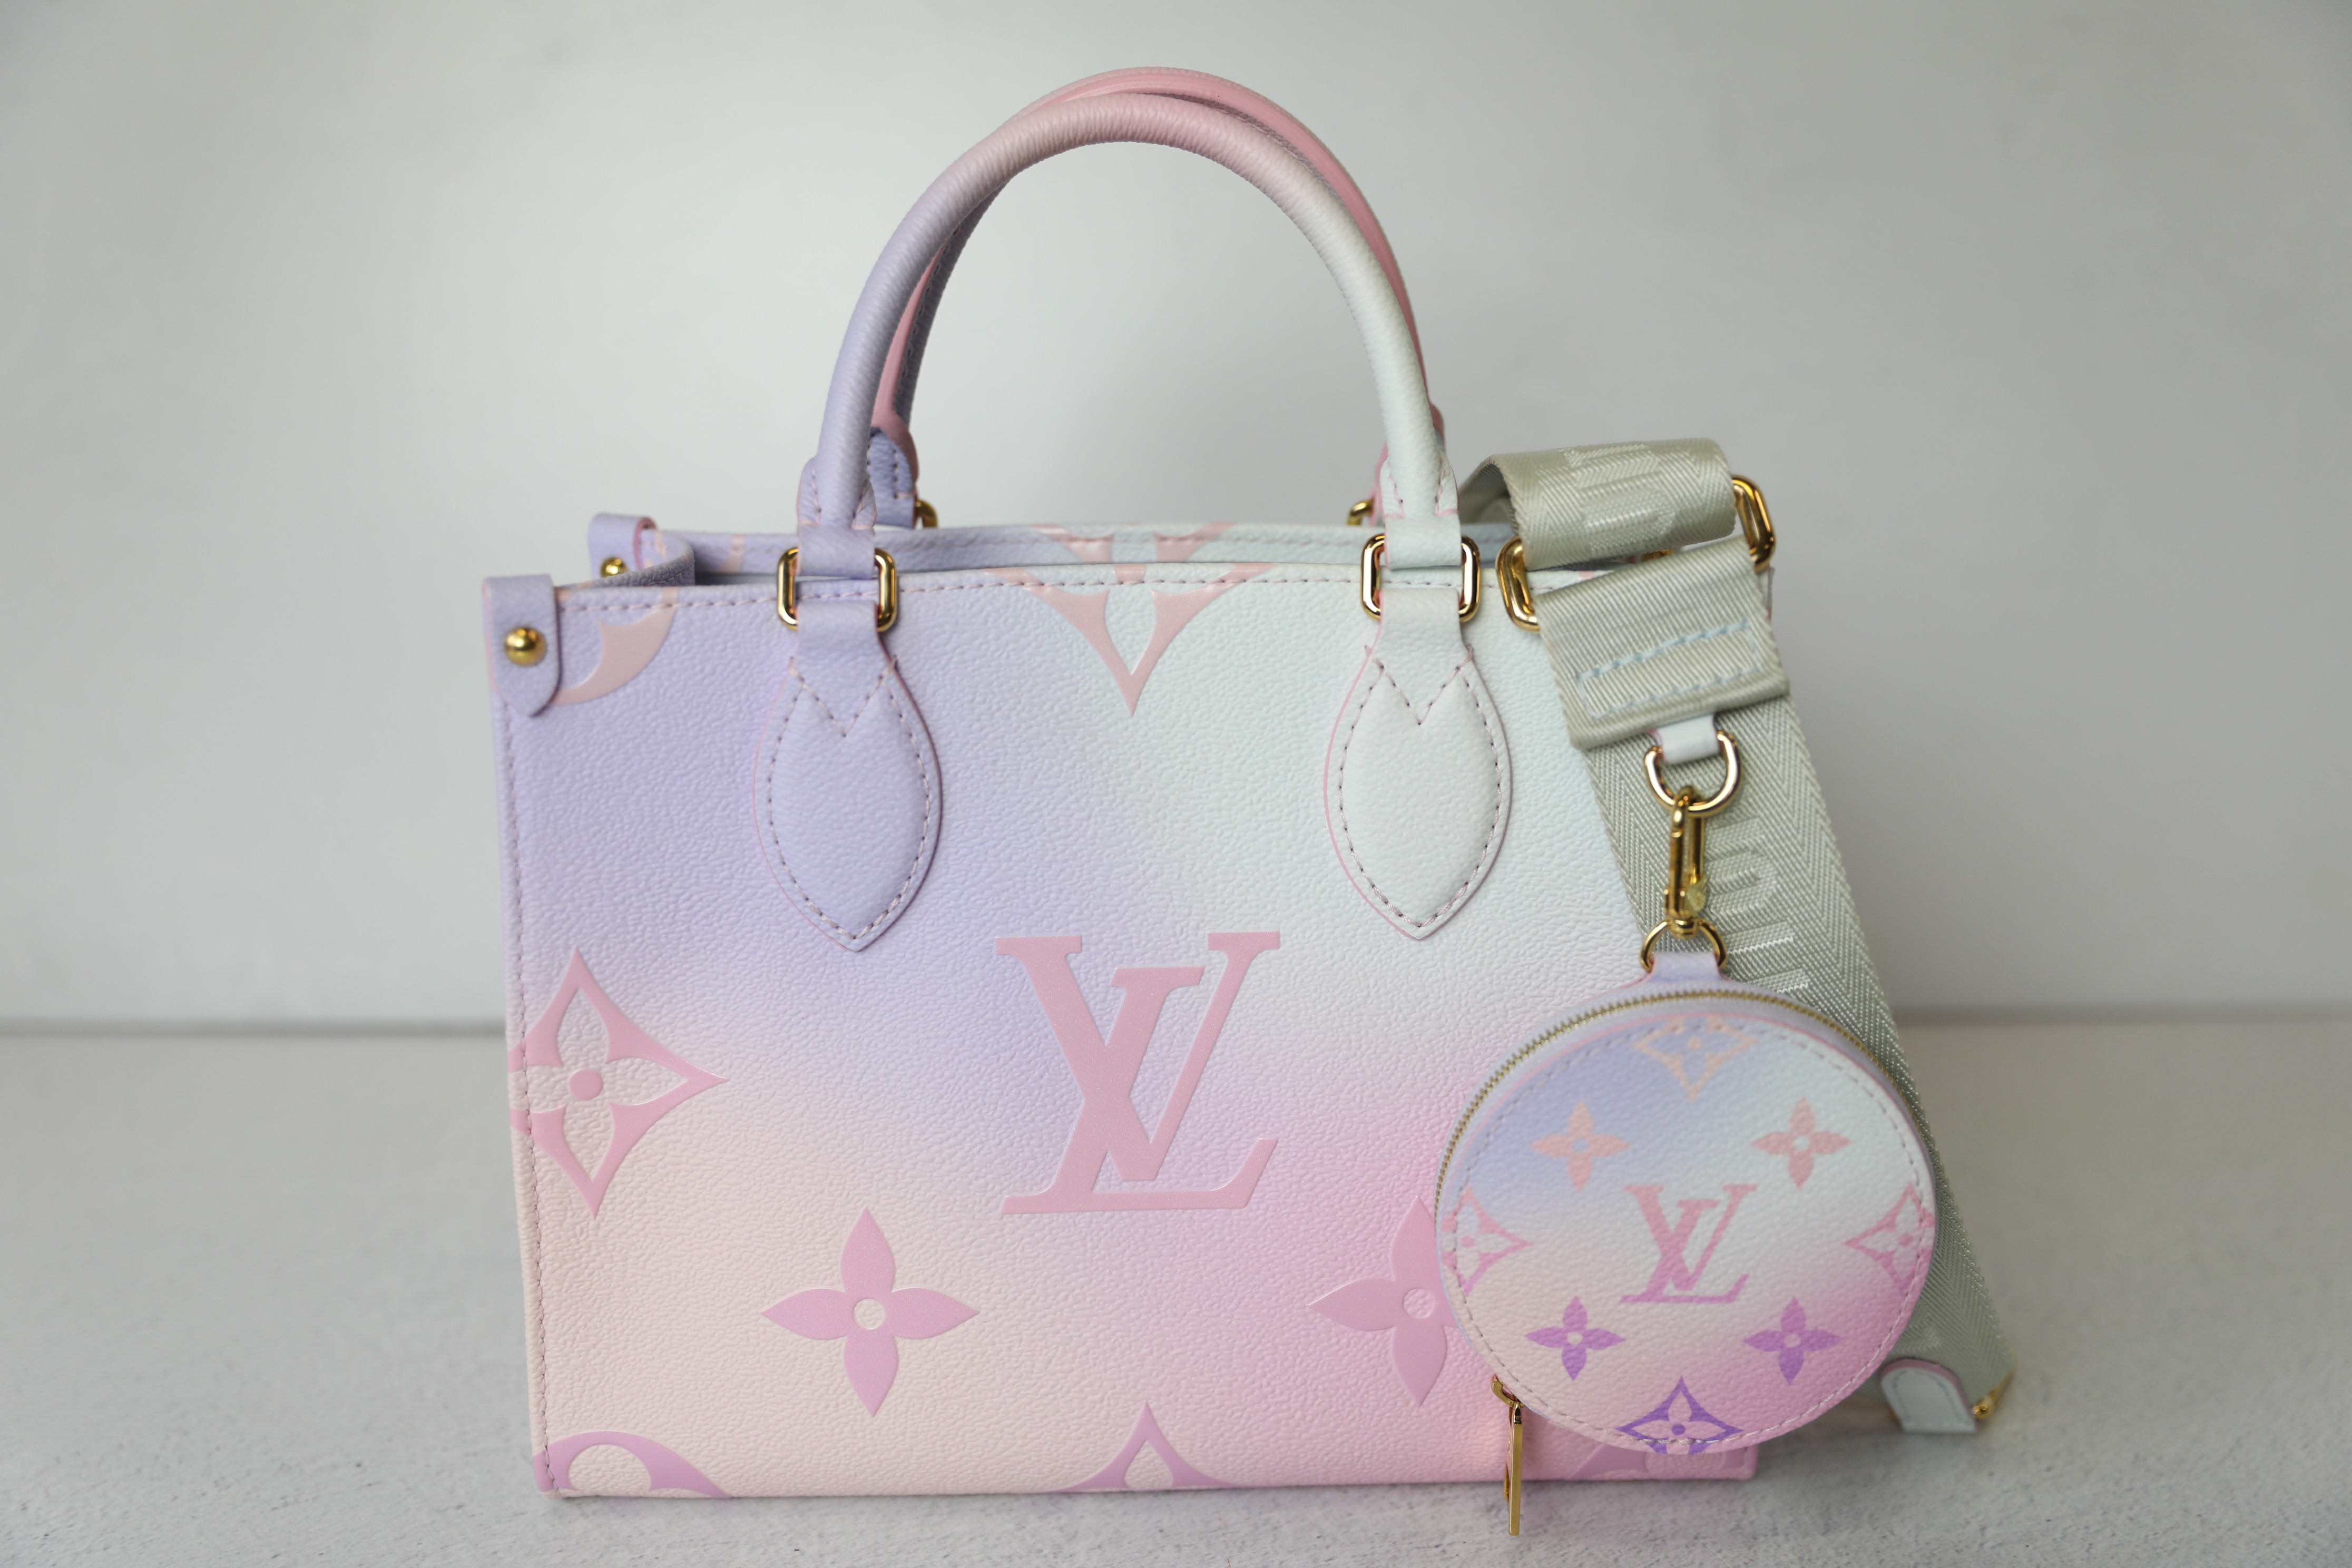 LOUIS VUITTON ON THE GO MULTI COLOR TOTE JUST ON TIME FOR MOTHER'S DAY GIFT  ♥️ $2977. COUTUREUPSCALECONSIGN.COM #lv #lvonthegotote #lvtotebag, By  Couture Upscale Consign